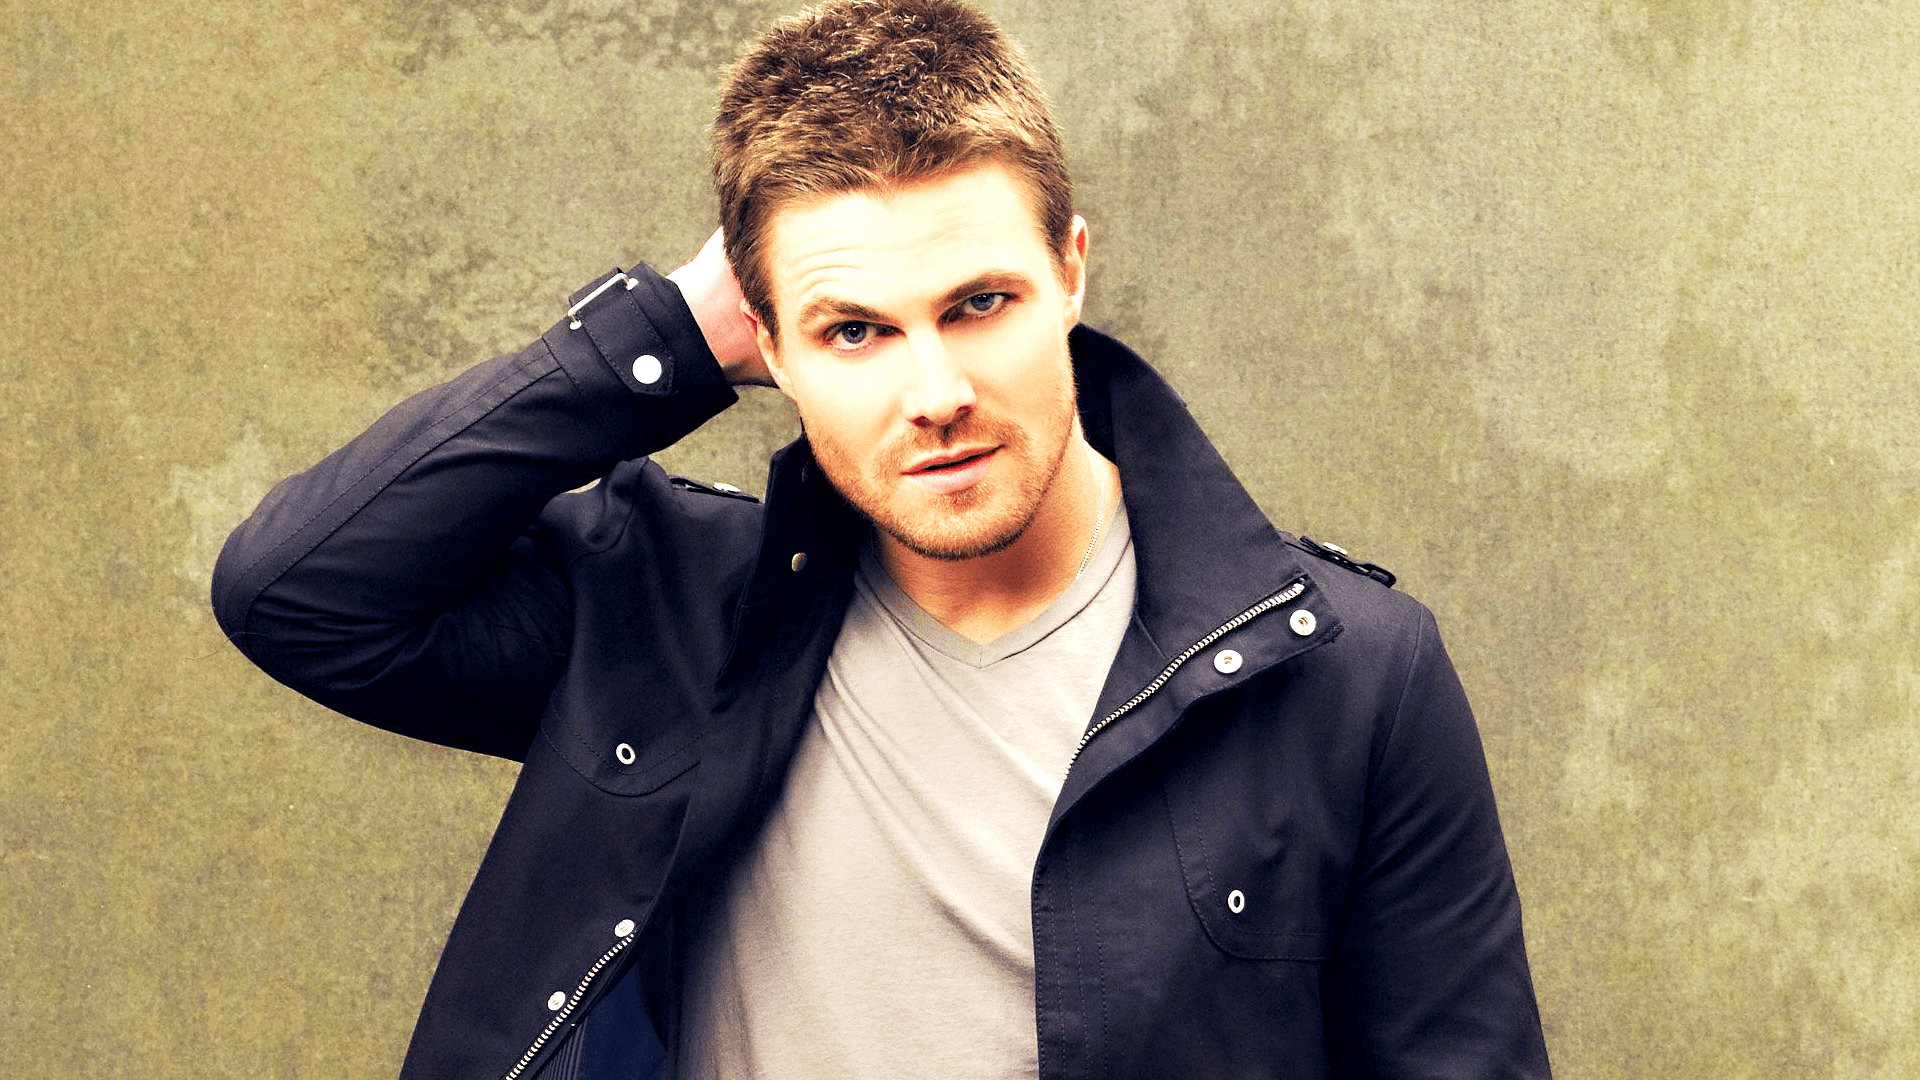 Stephen Amell HD Wallpapers.